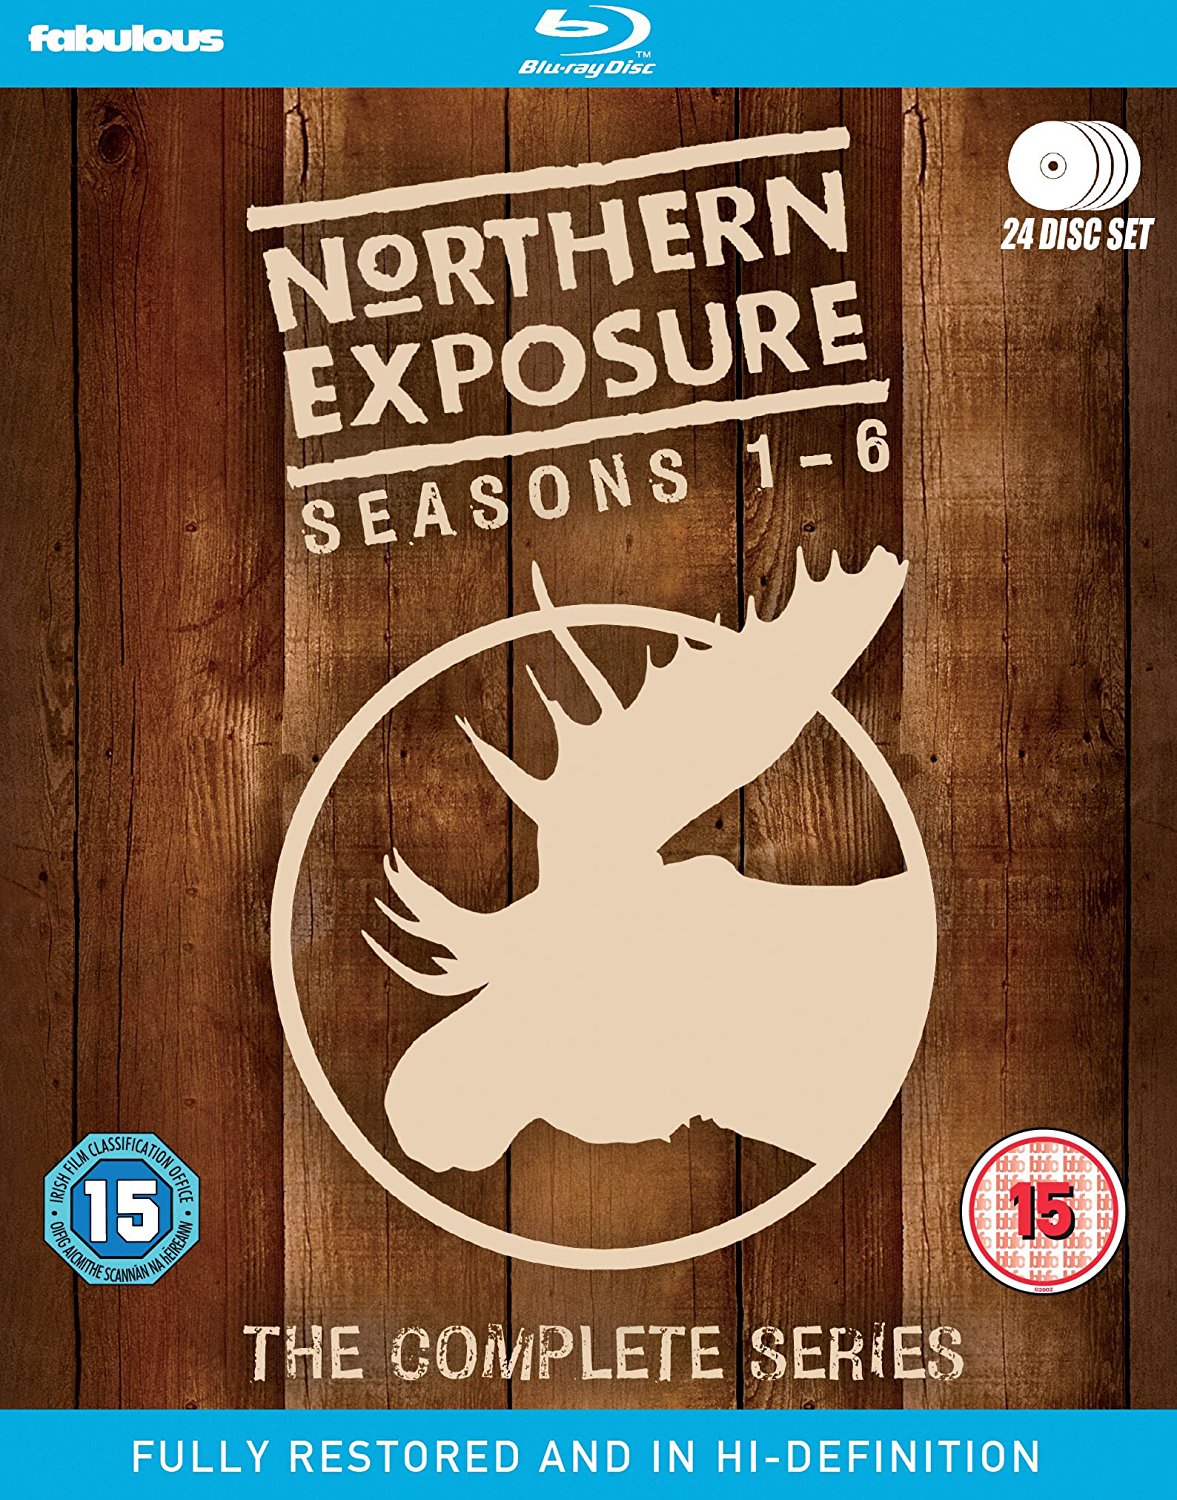 boom competitions - win Northern Exposure: the Complete Series on Blu-ray